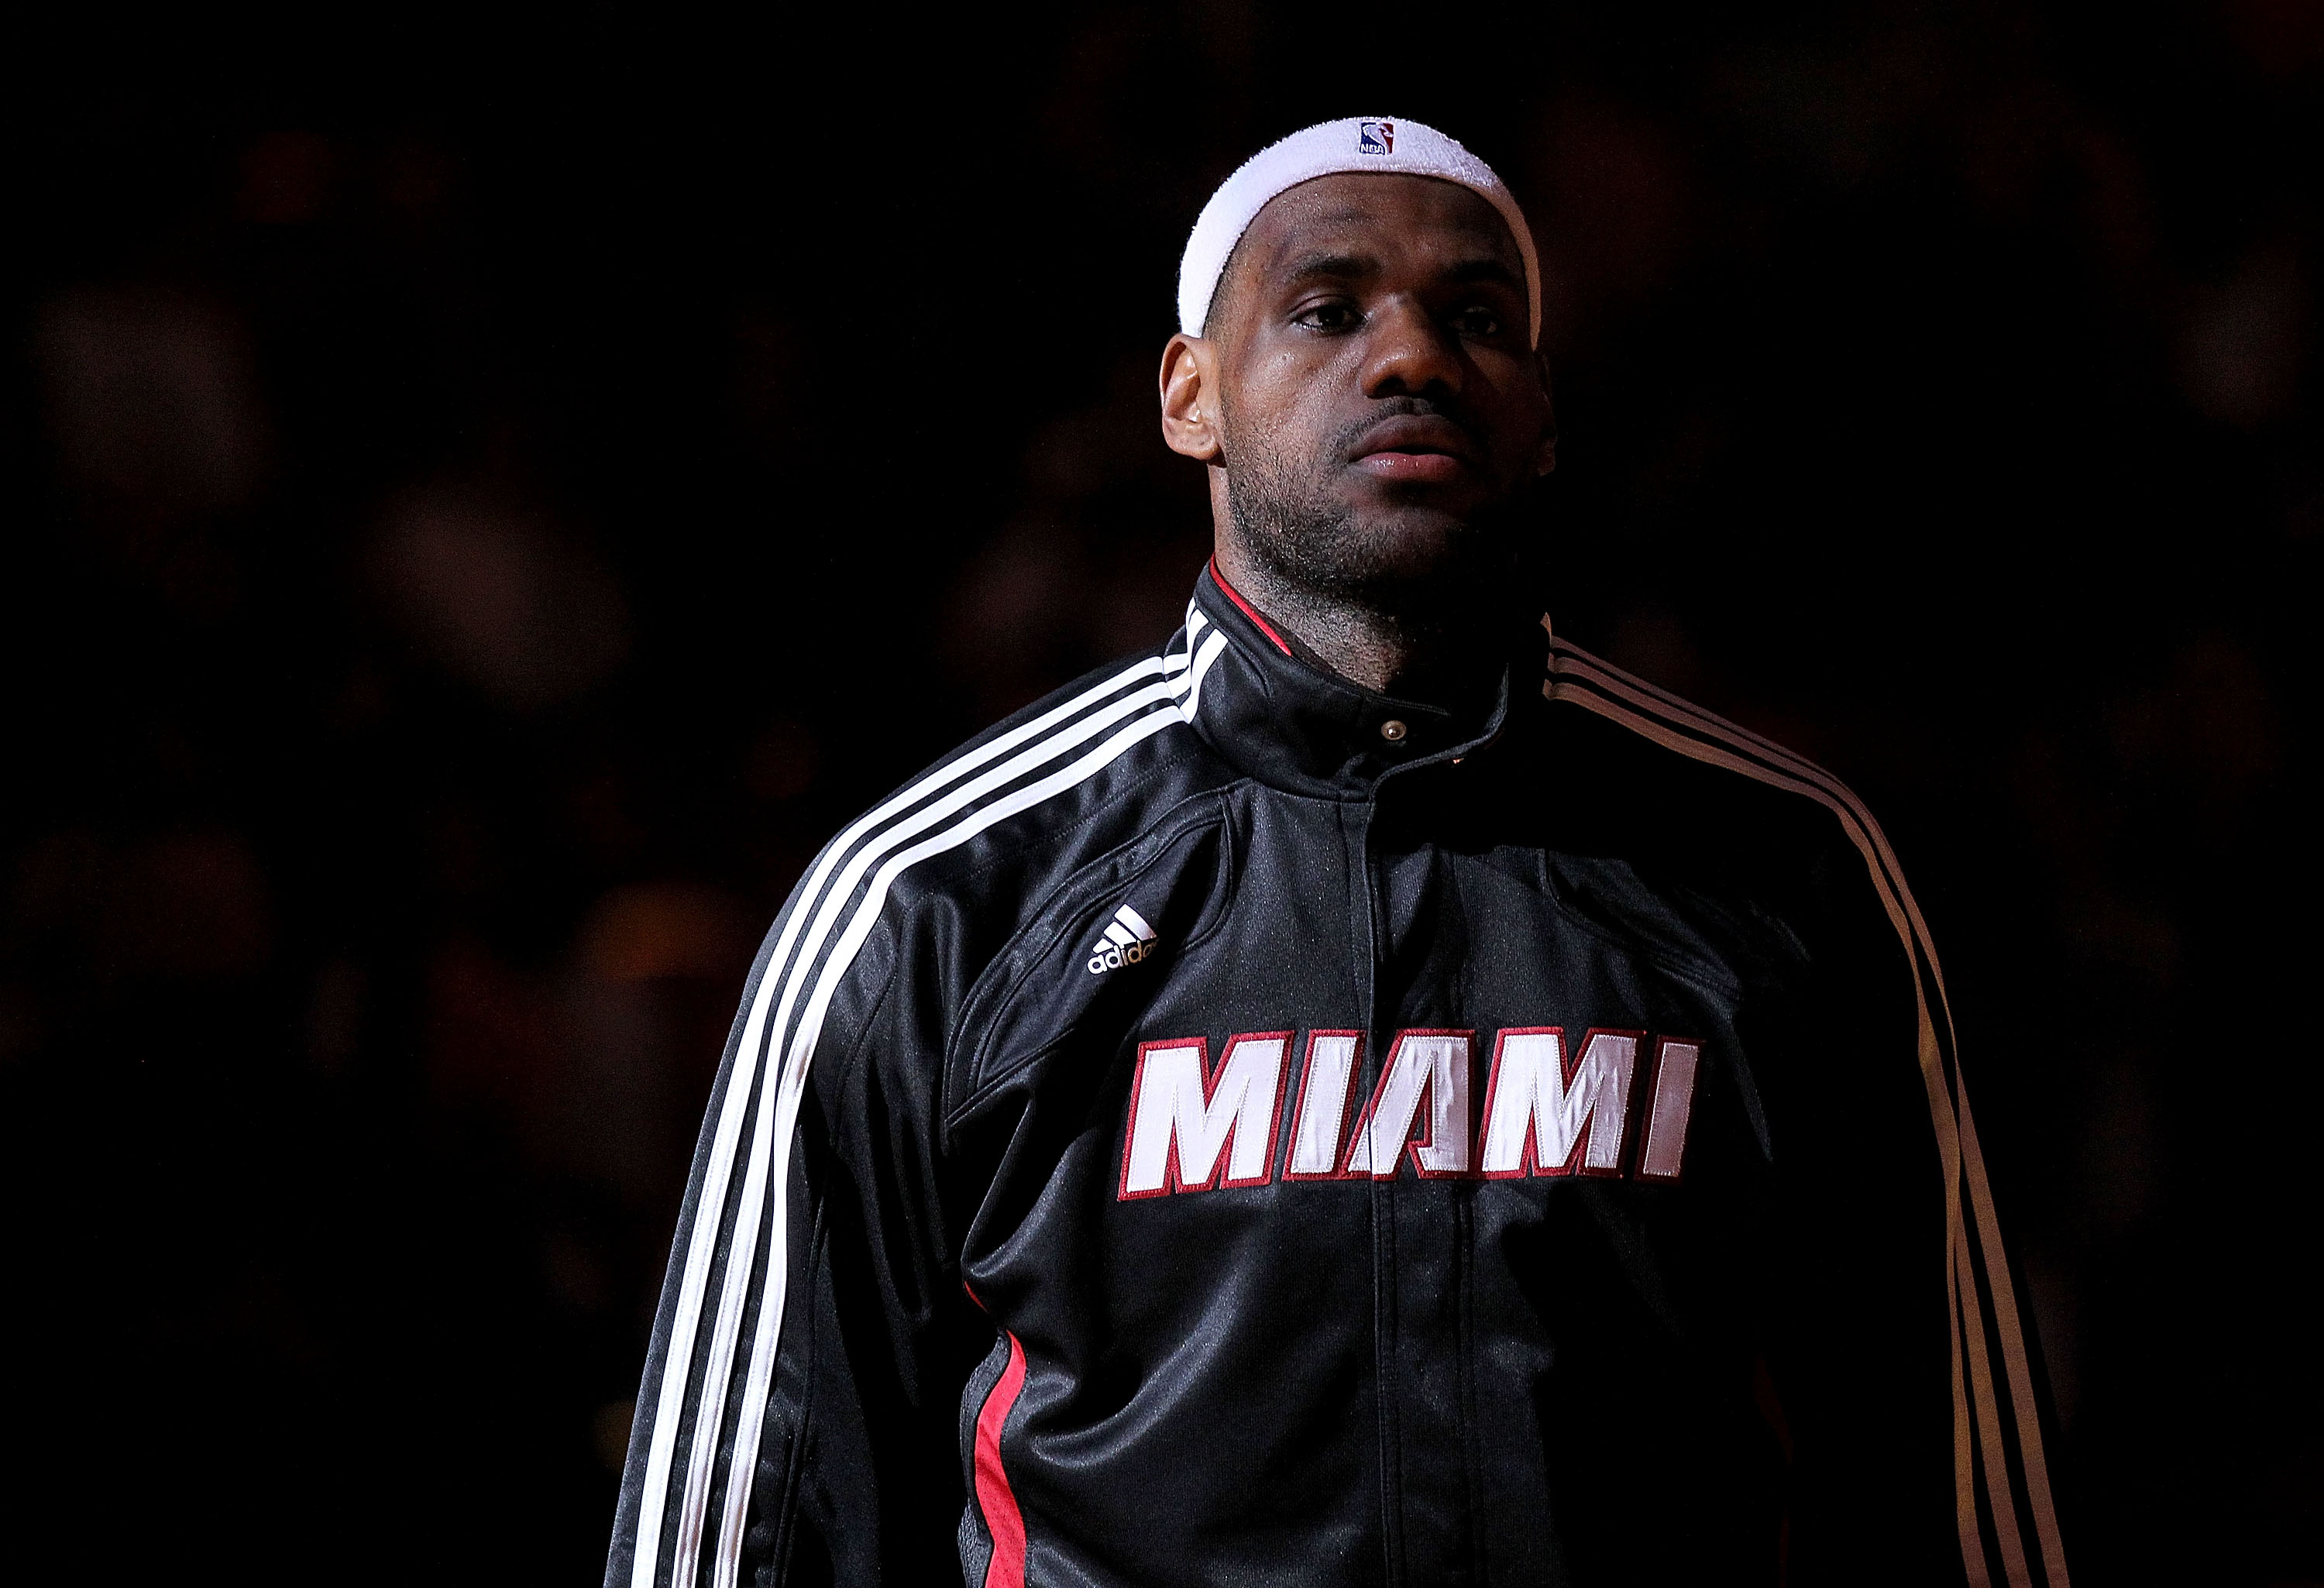 MIAMI, FL - DECEMBER 04:  LeBron James #6 of the Miami Heat looks on  during pregame against the Atlanta Hawks at American Airlines Arena on December 4, 2010 in Miami, Florida. NOTE TO USER: User expressly acknowledges and agrees that, by downloading and/